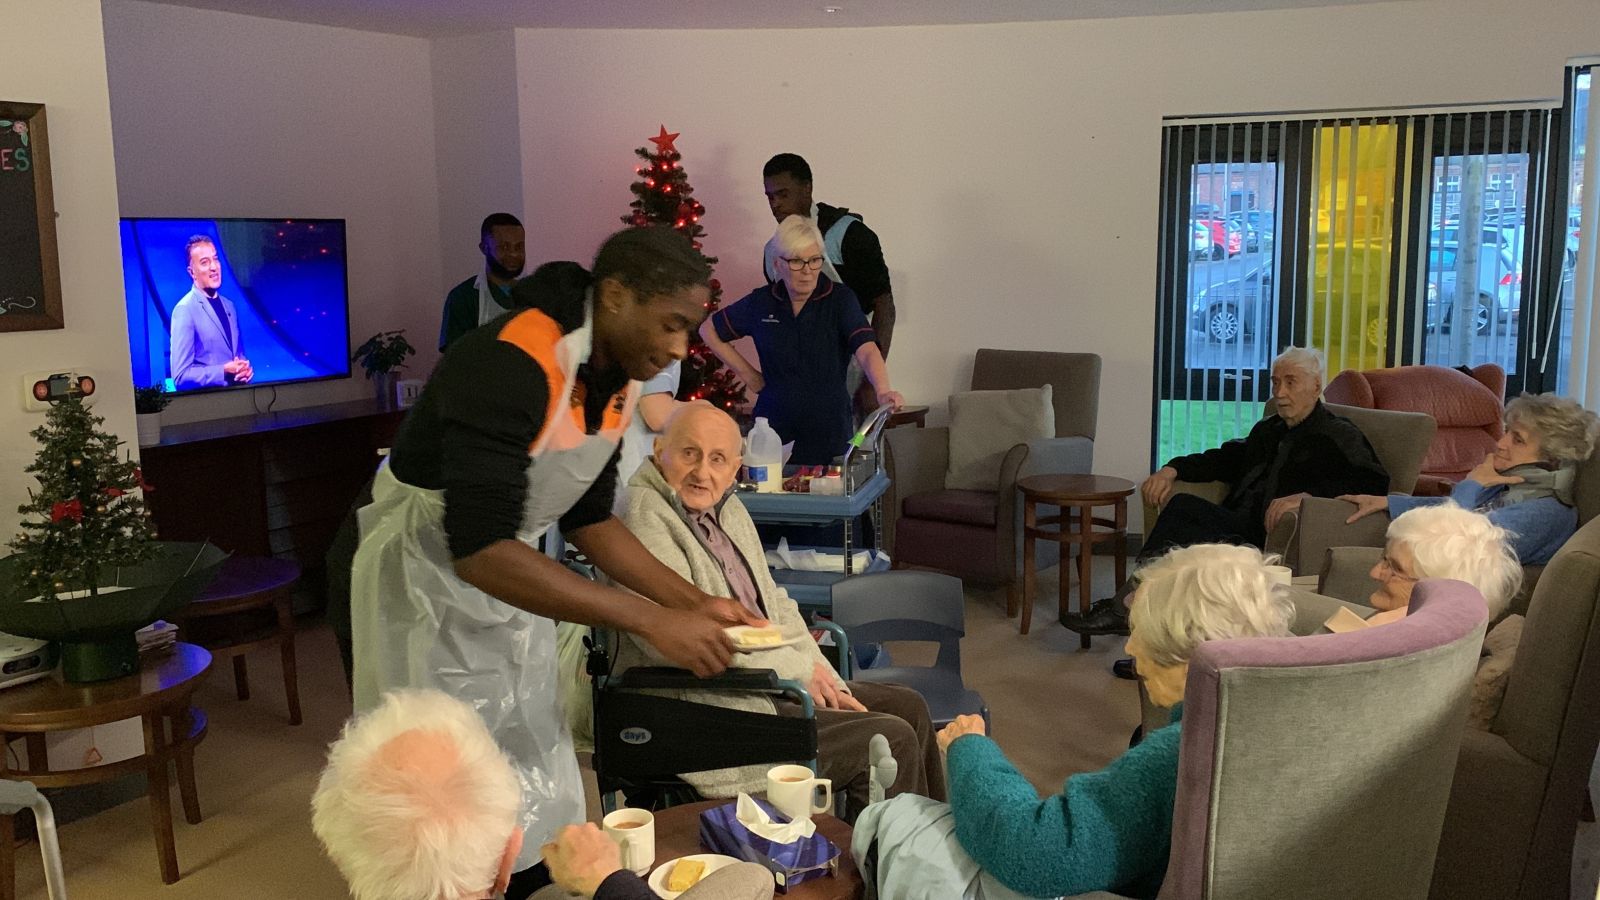 CJ Clarke and Jed Abbey help the Haven Court team serve drinks and treats to residents..jpg